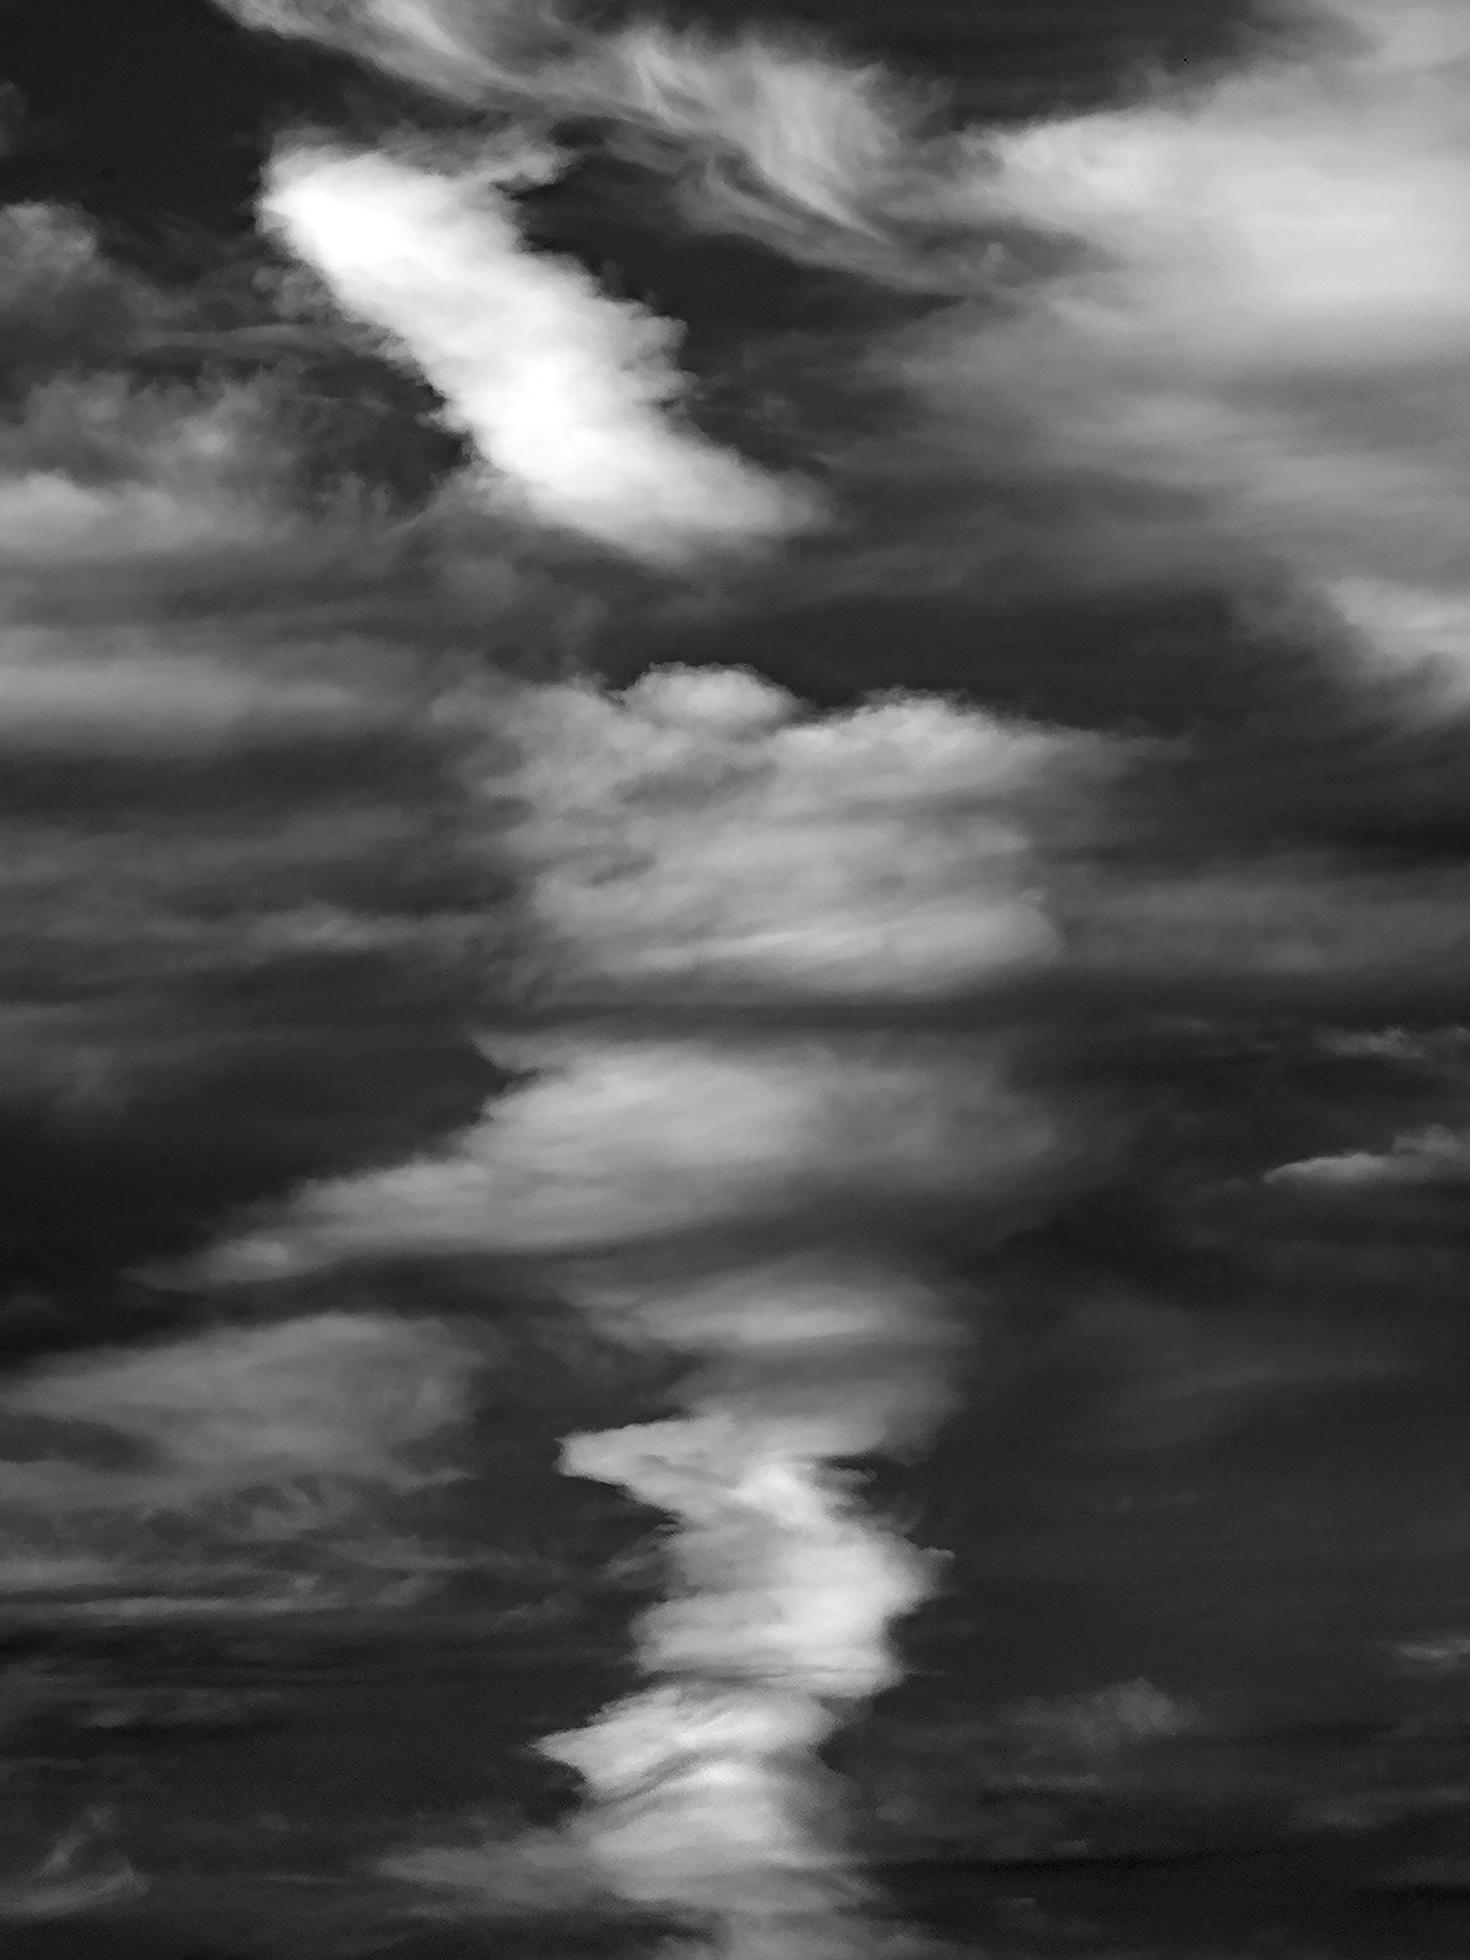 Tall photo of very dark clouds with a center vertical segment of white clouds. The photo was taken on Oregon’s Sauvie Island in 2021. Sauvie Island is a 24,000-acre island along the Columbia River.